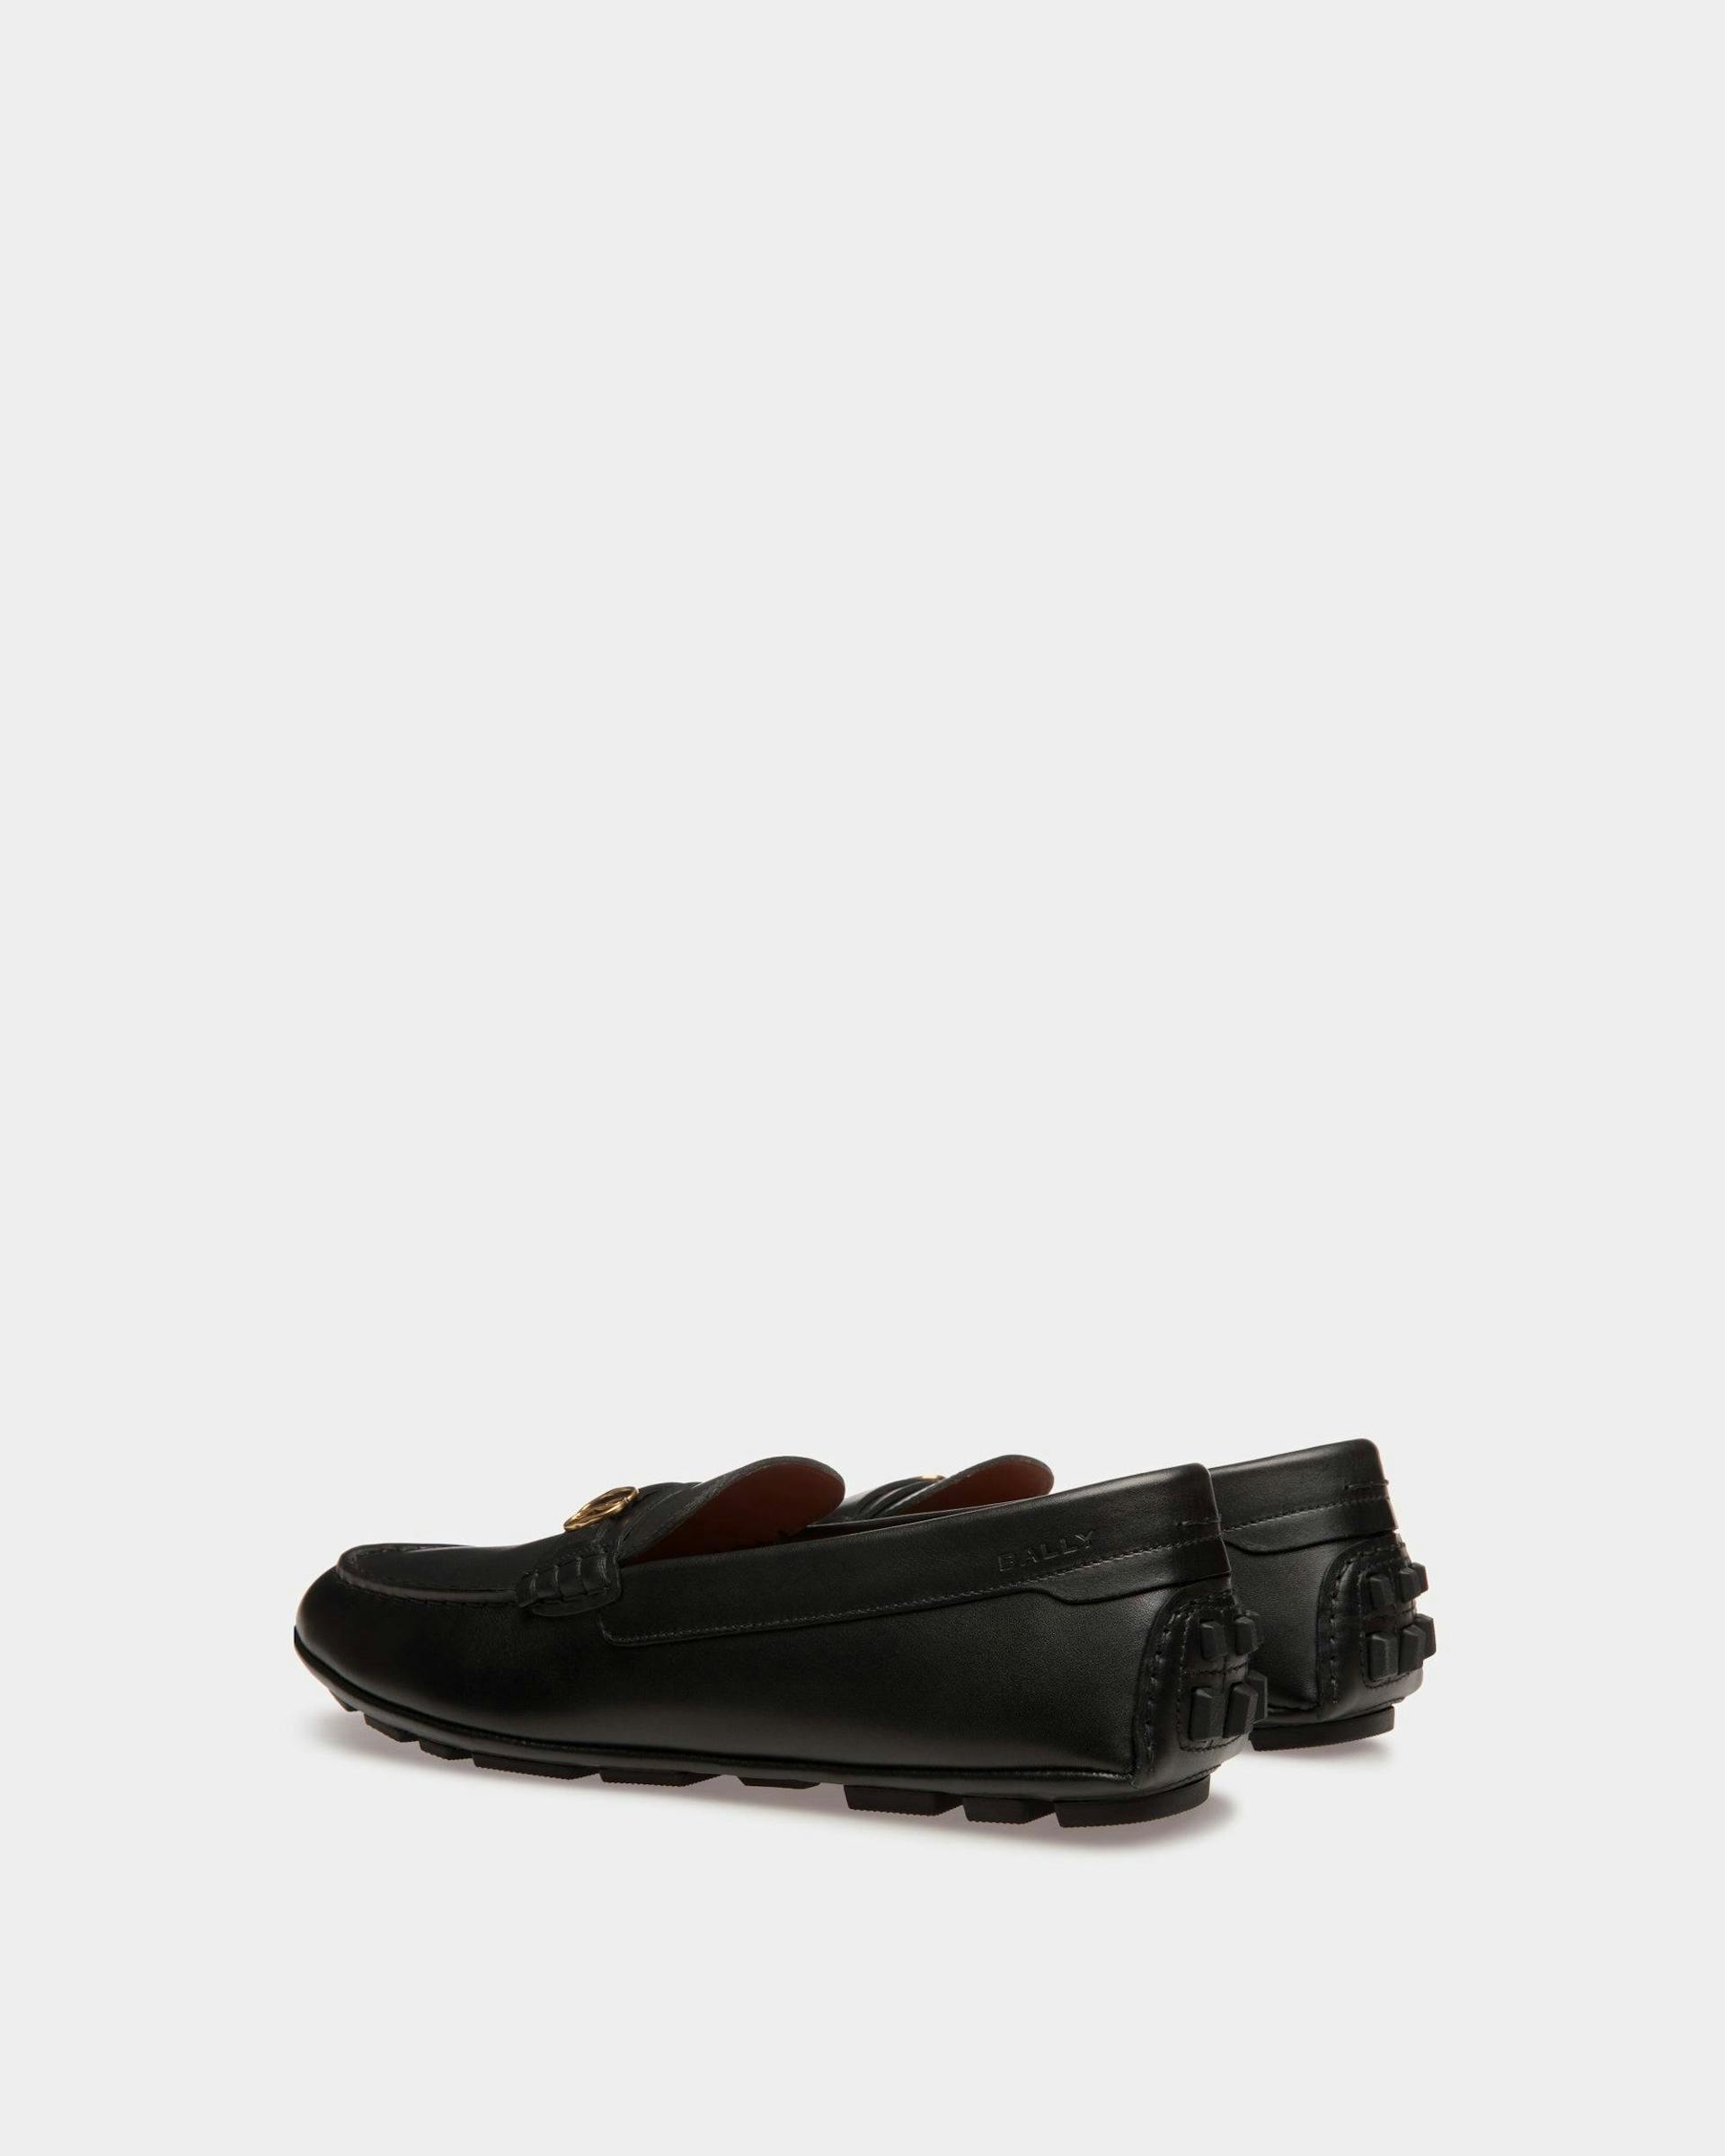 Kerbs Drivers In Black Leather - Men's - Bally - 03